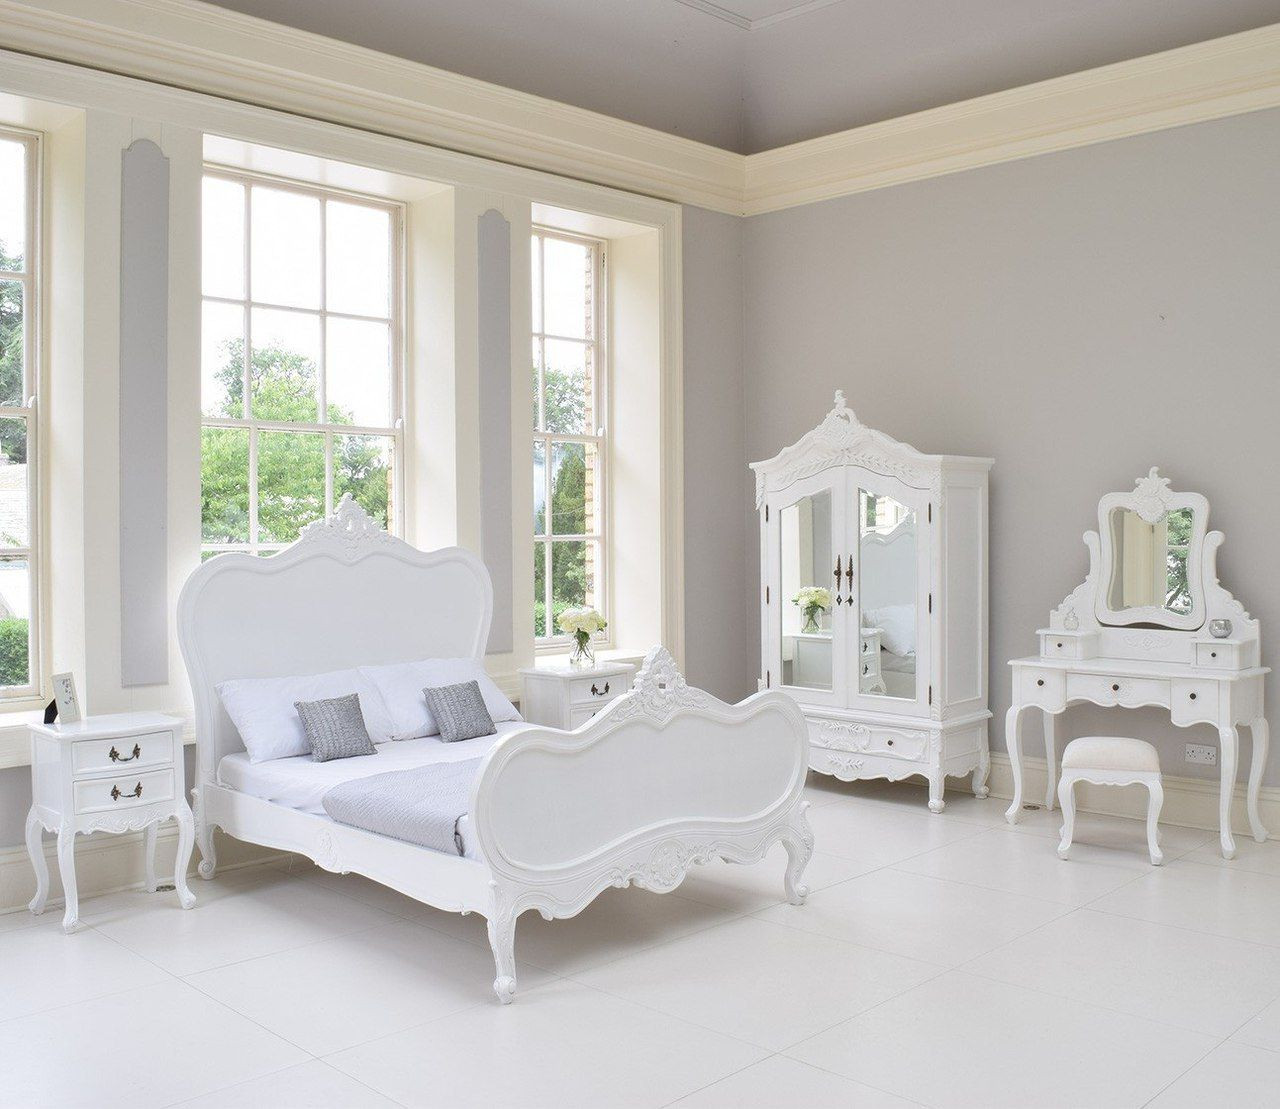 Shabby Chic Bedroom Furniture Sets
 Provincial Luxury Carved Bed Set White White in 2020